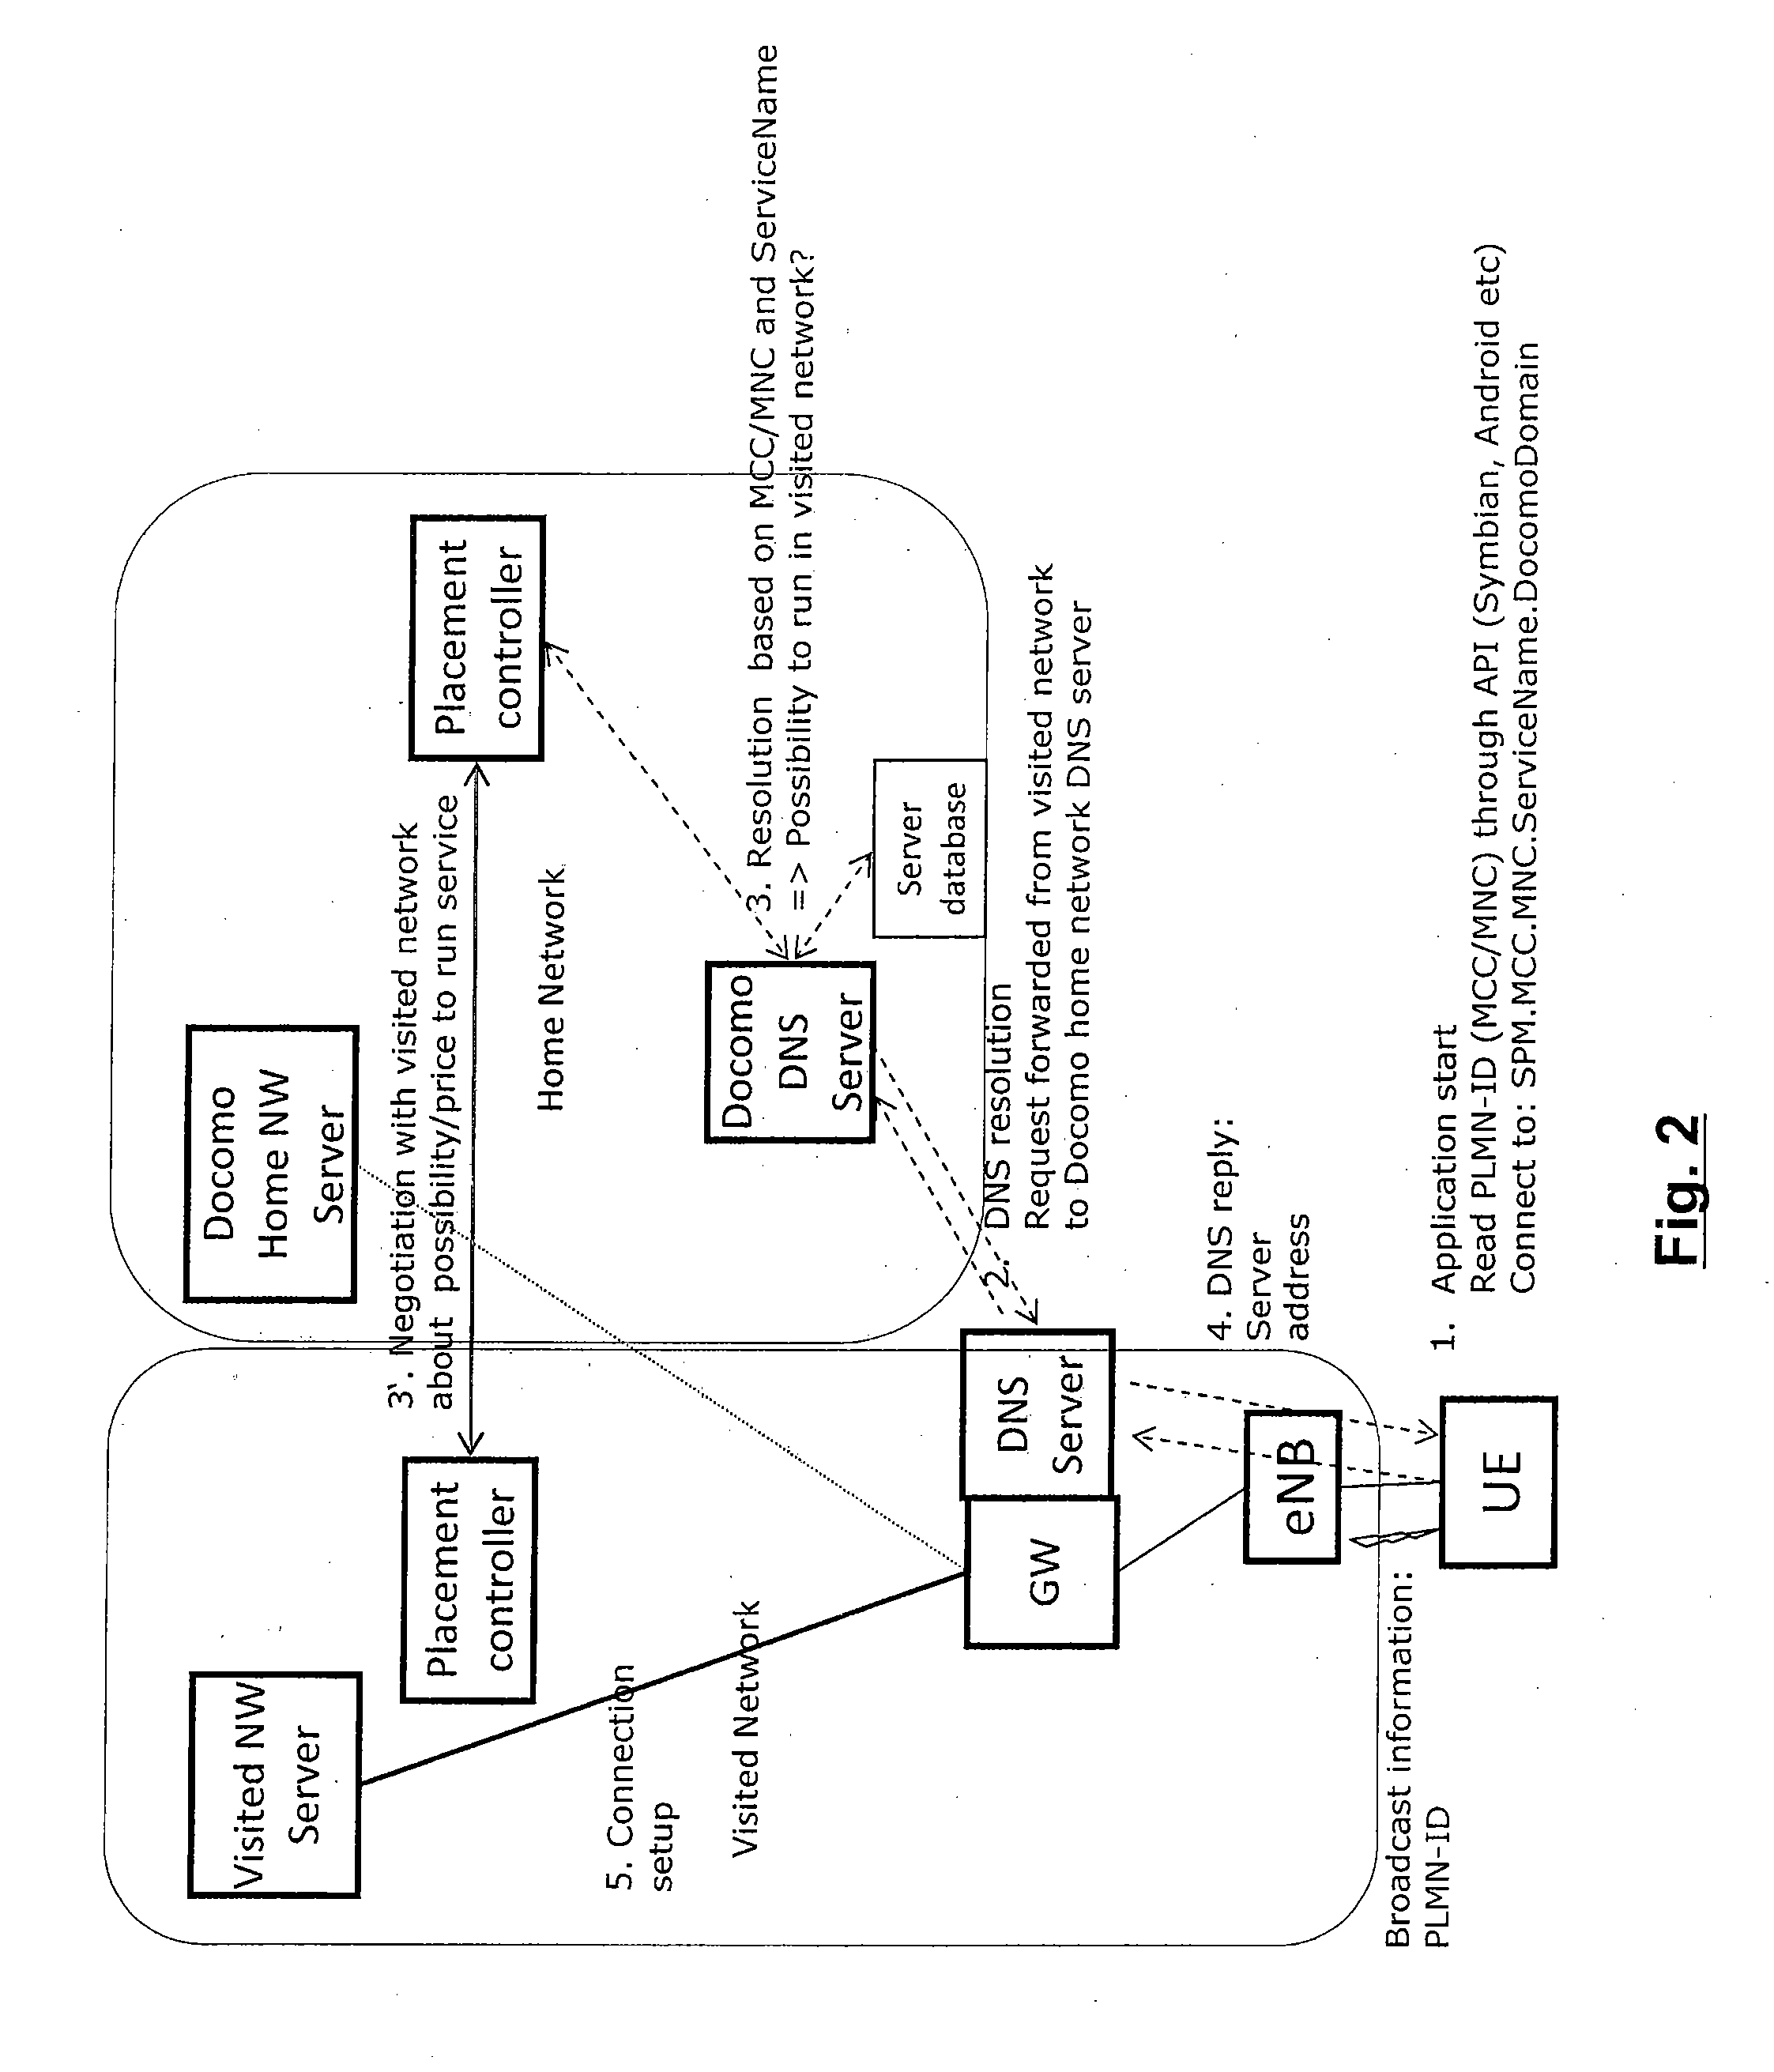 Method and apparatus for determining a server which should respond to a service request